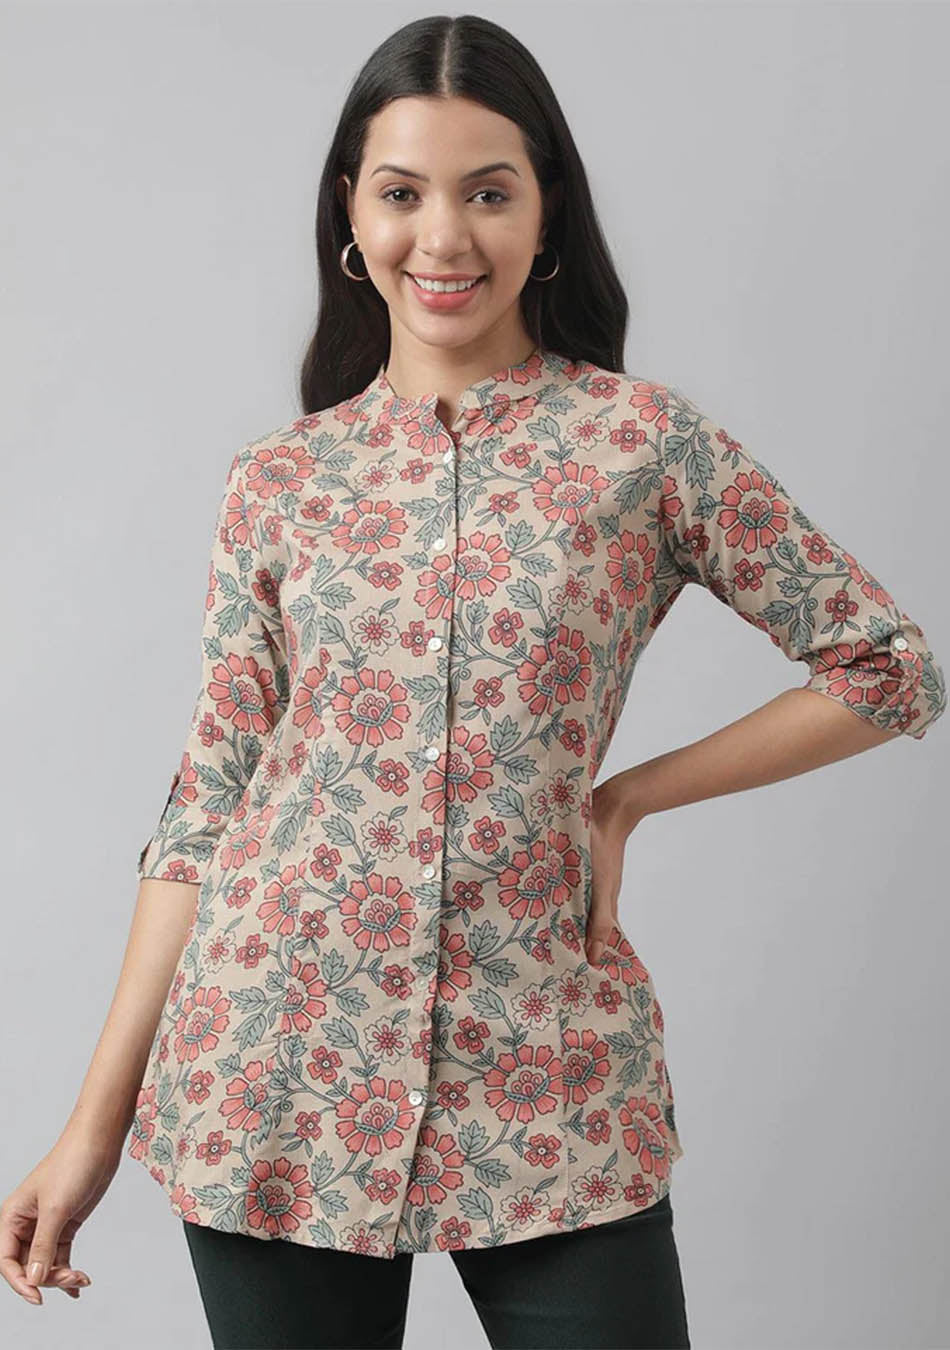 Dark Beige Floral Printed Rayon A-line Shirt Style Top